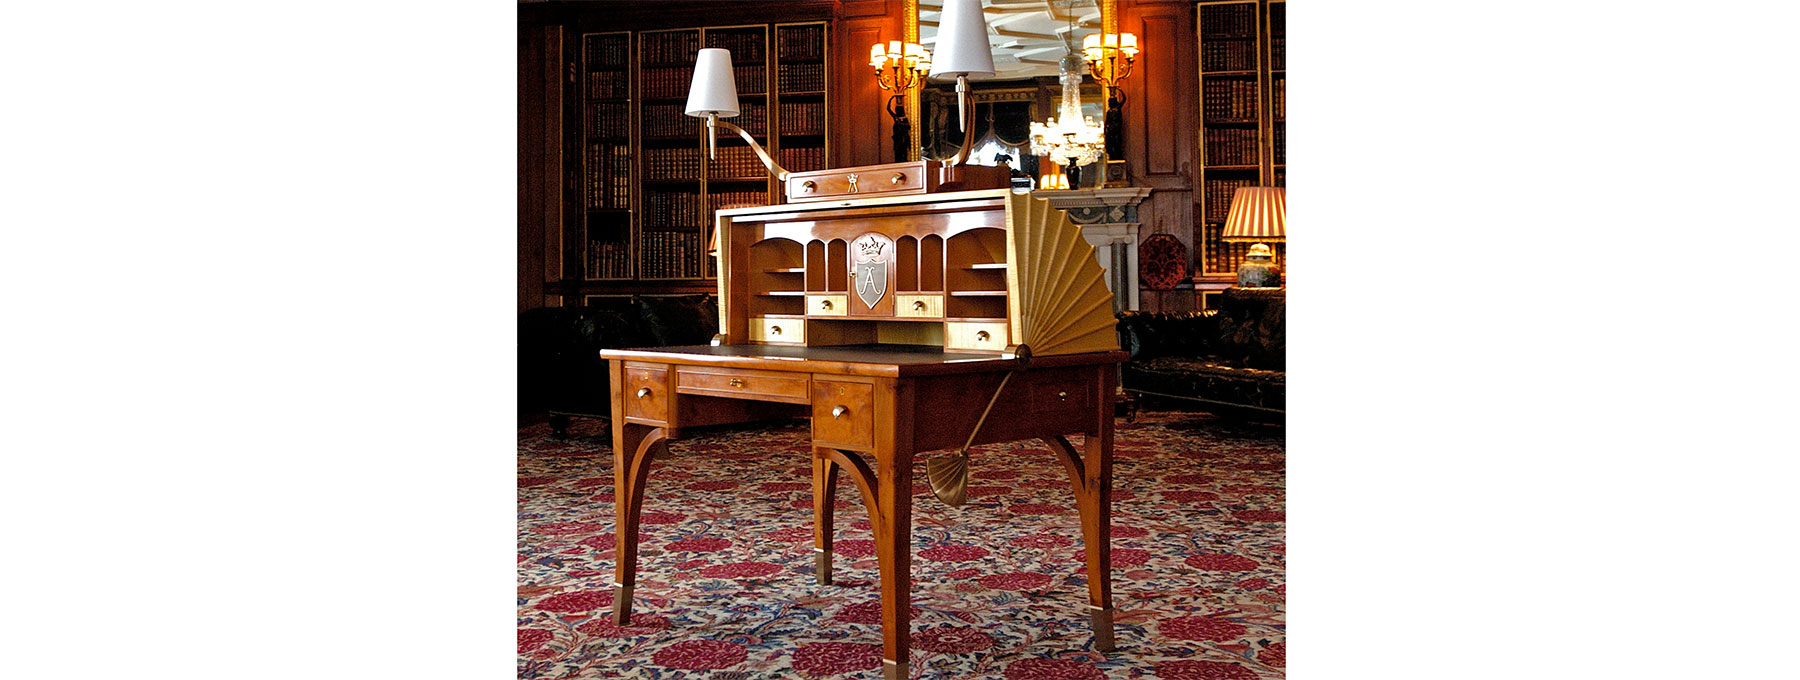 Theo Cook's Lady Bath Desk